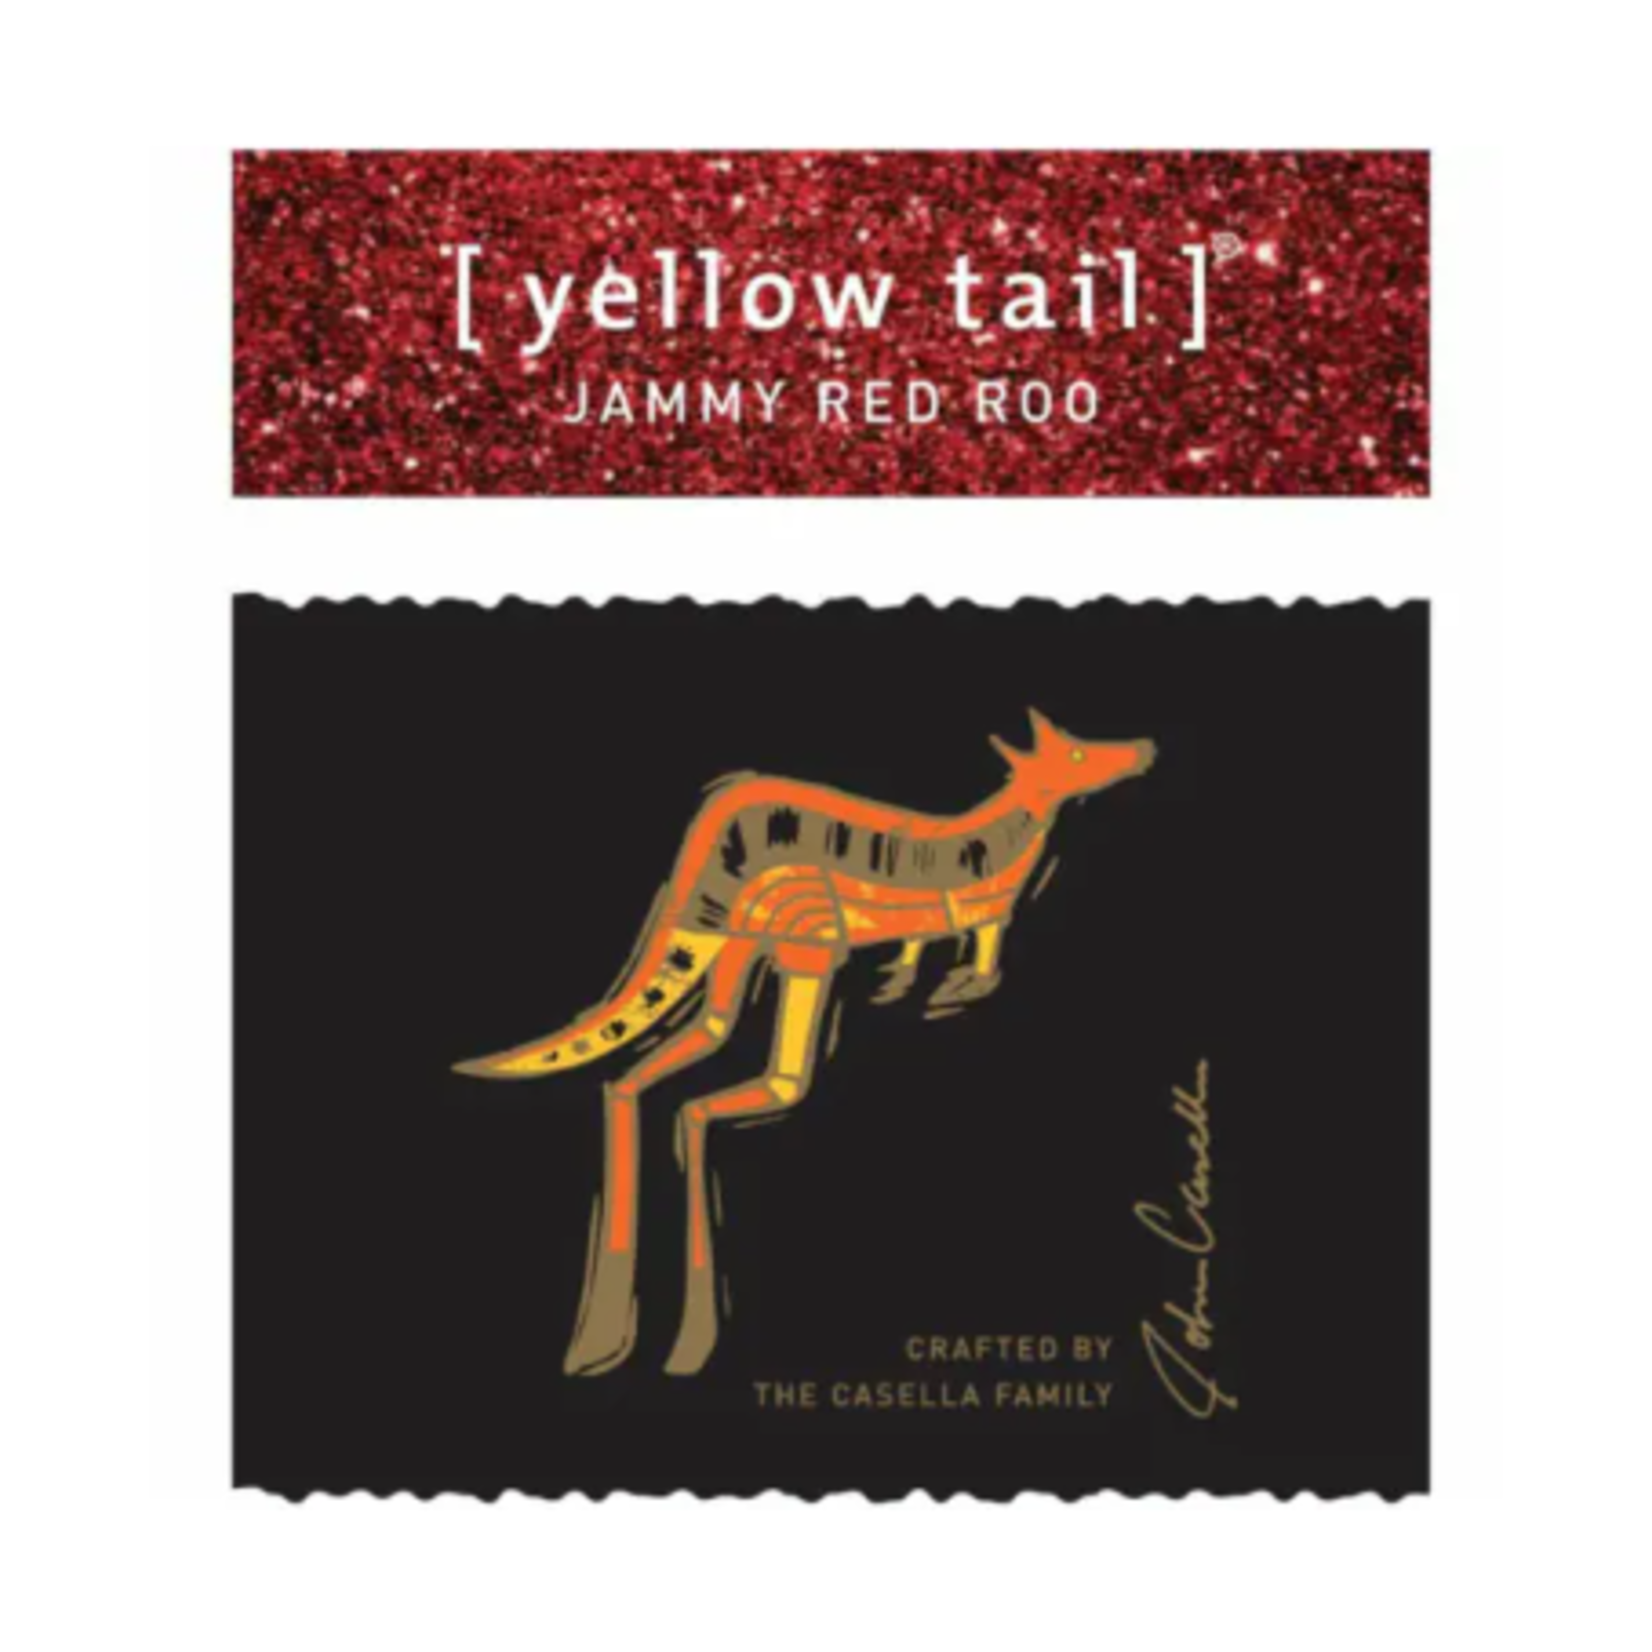 Yellow Tail Yellow Tail Jammy Red Roo